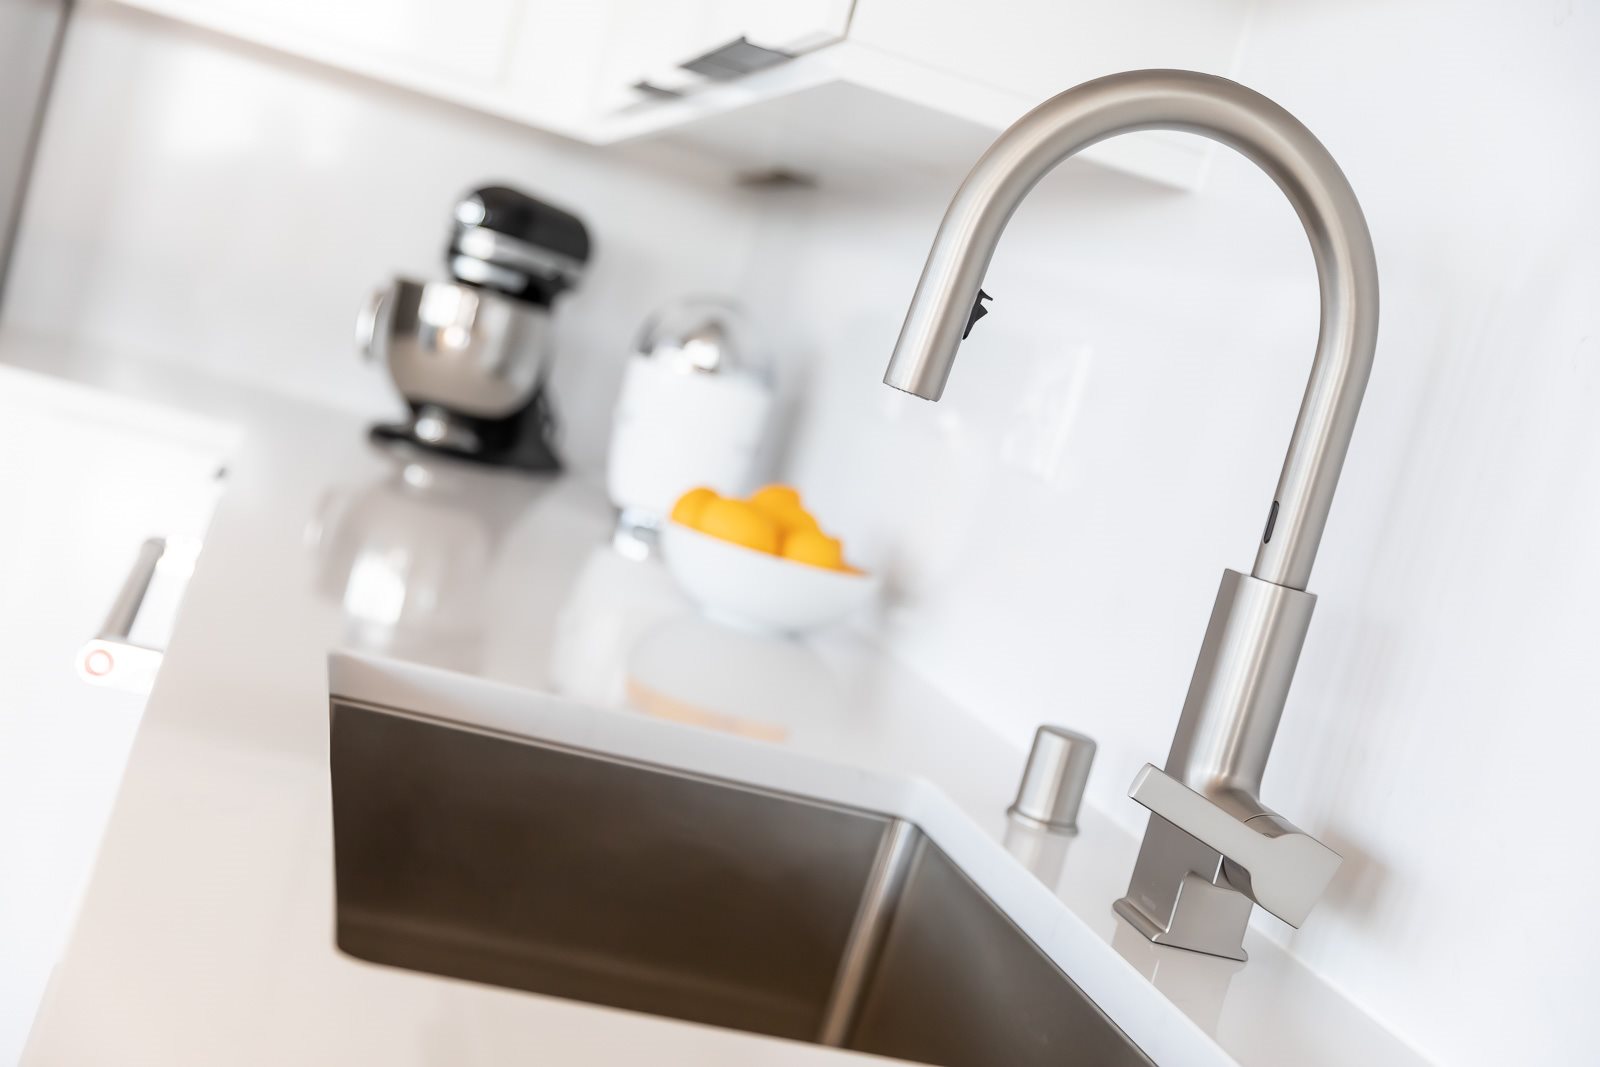 Touchless faucet in Penthouse kitchen